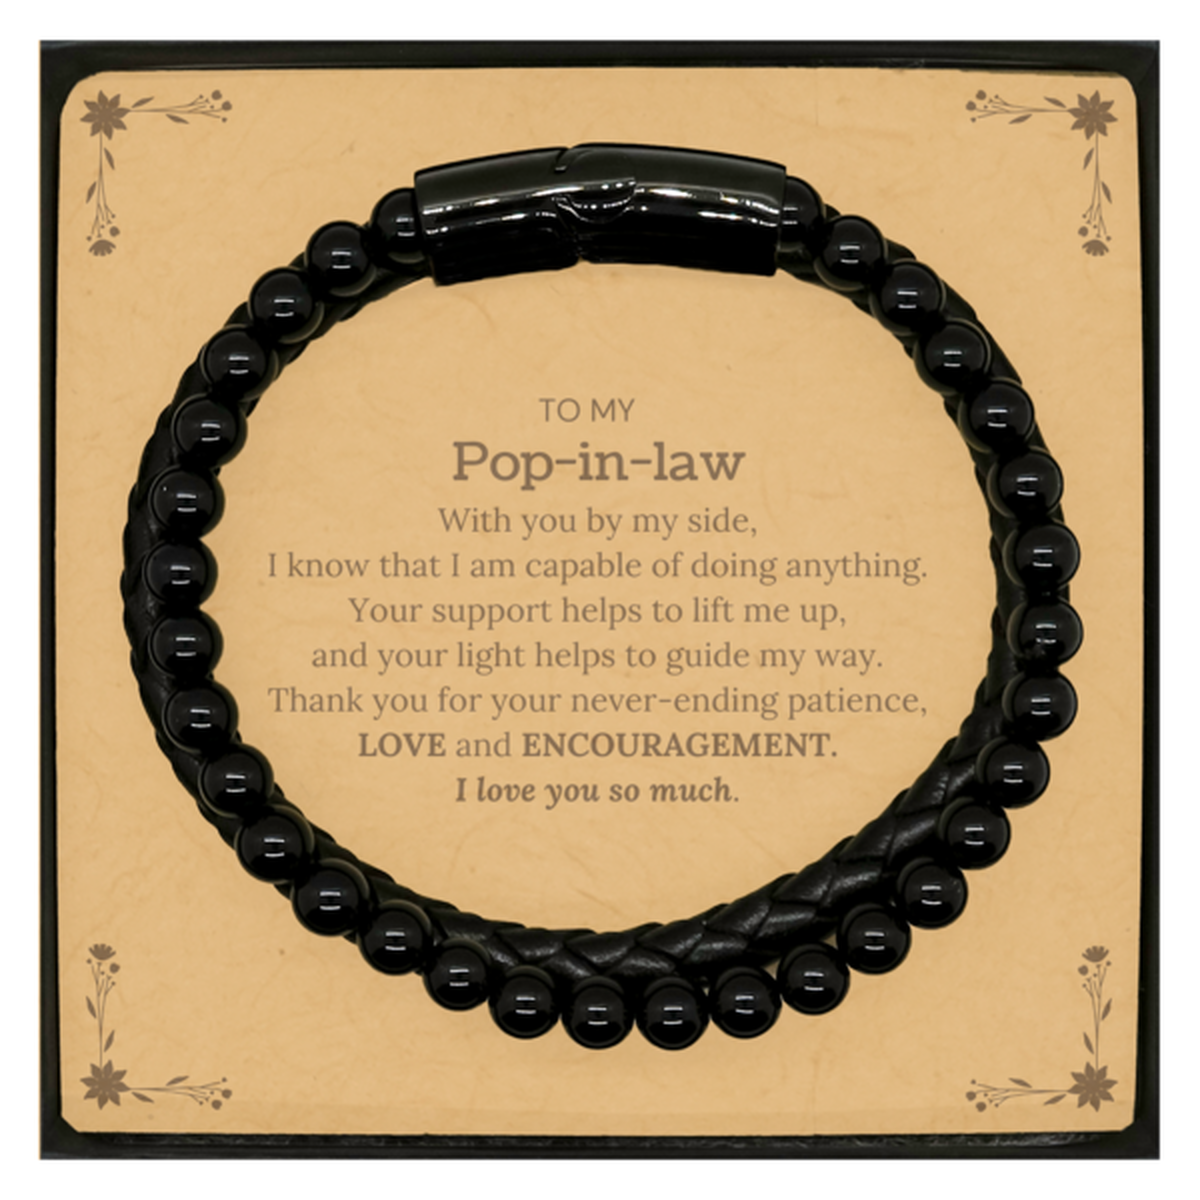 Appreciation Pop-in-law Stone Leather Bracelets Gifts, To My Pop-in-law Birthday Christmas Wedding Keepsake Gifts for Pop-in-law With you by my side, I know that I am capable of doing anything. I love you so much